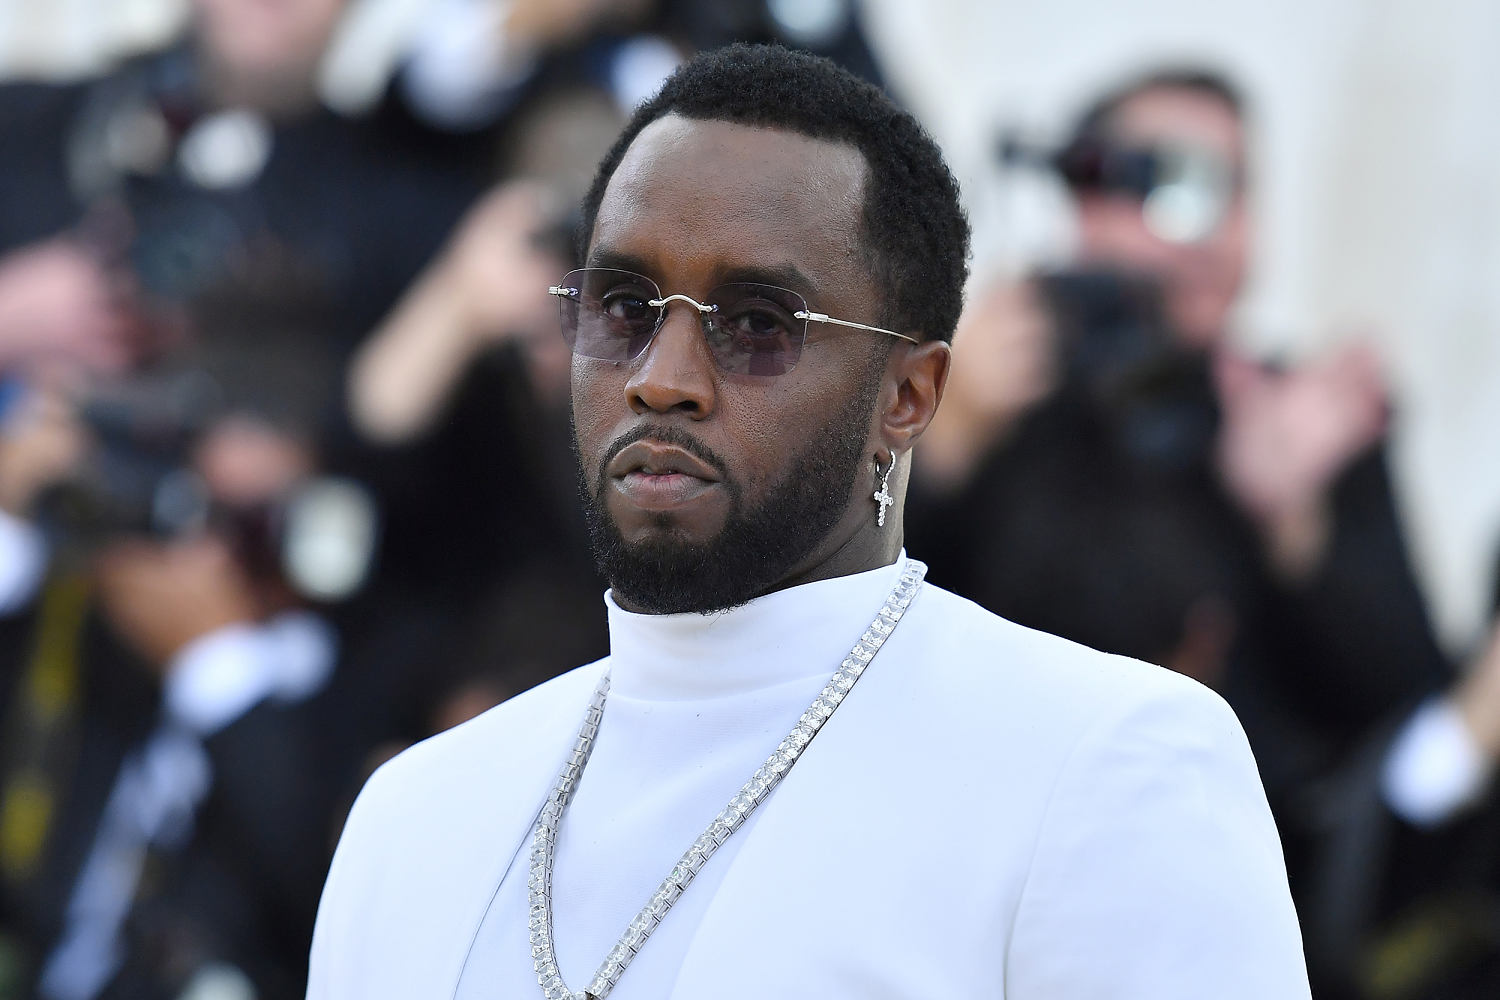 Sean 'Diddy' Combs' statement was more manipulation than apology, abuse and PR experts say